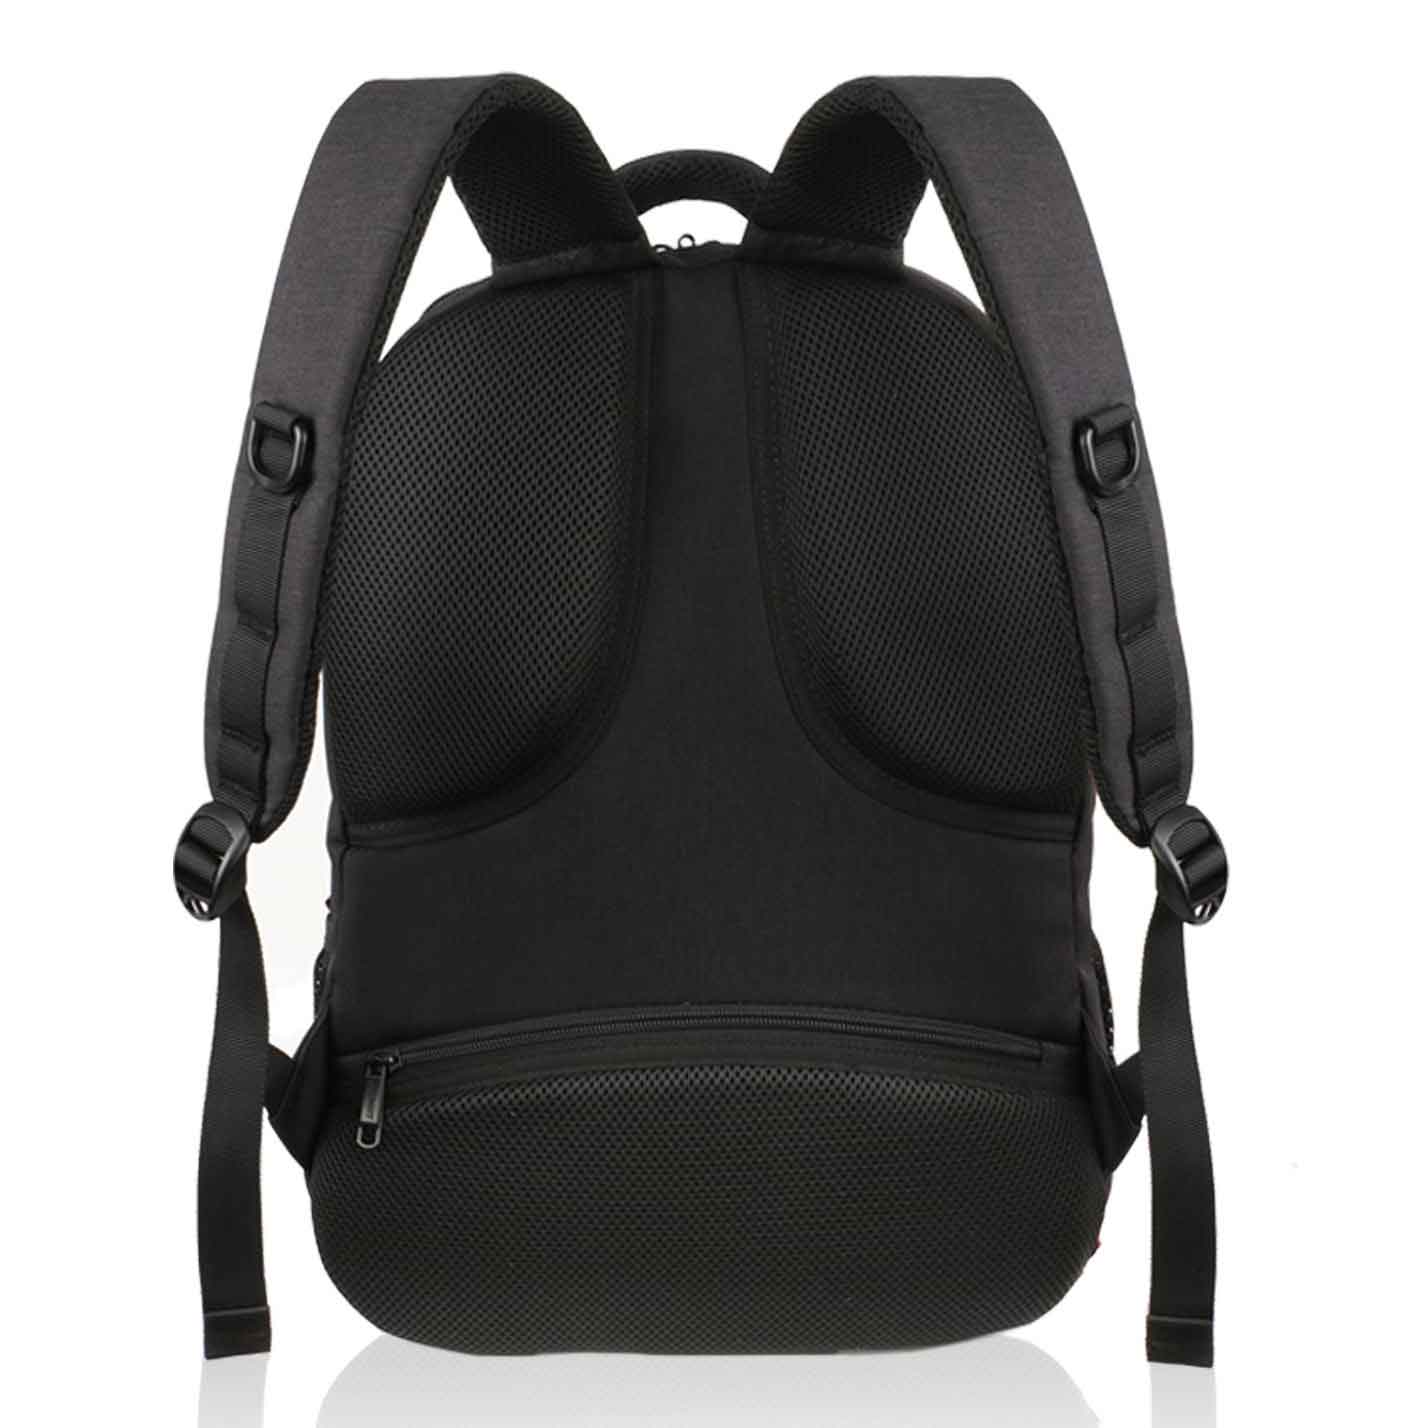 Matein Lunch Backpack - travel laptop backpack